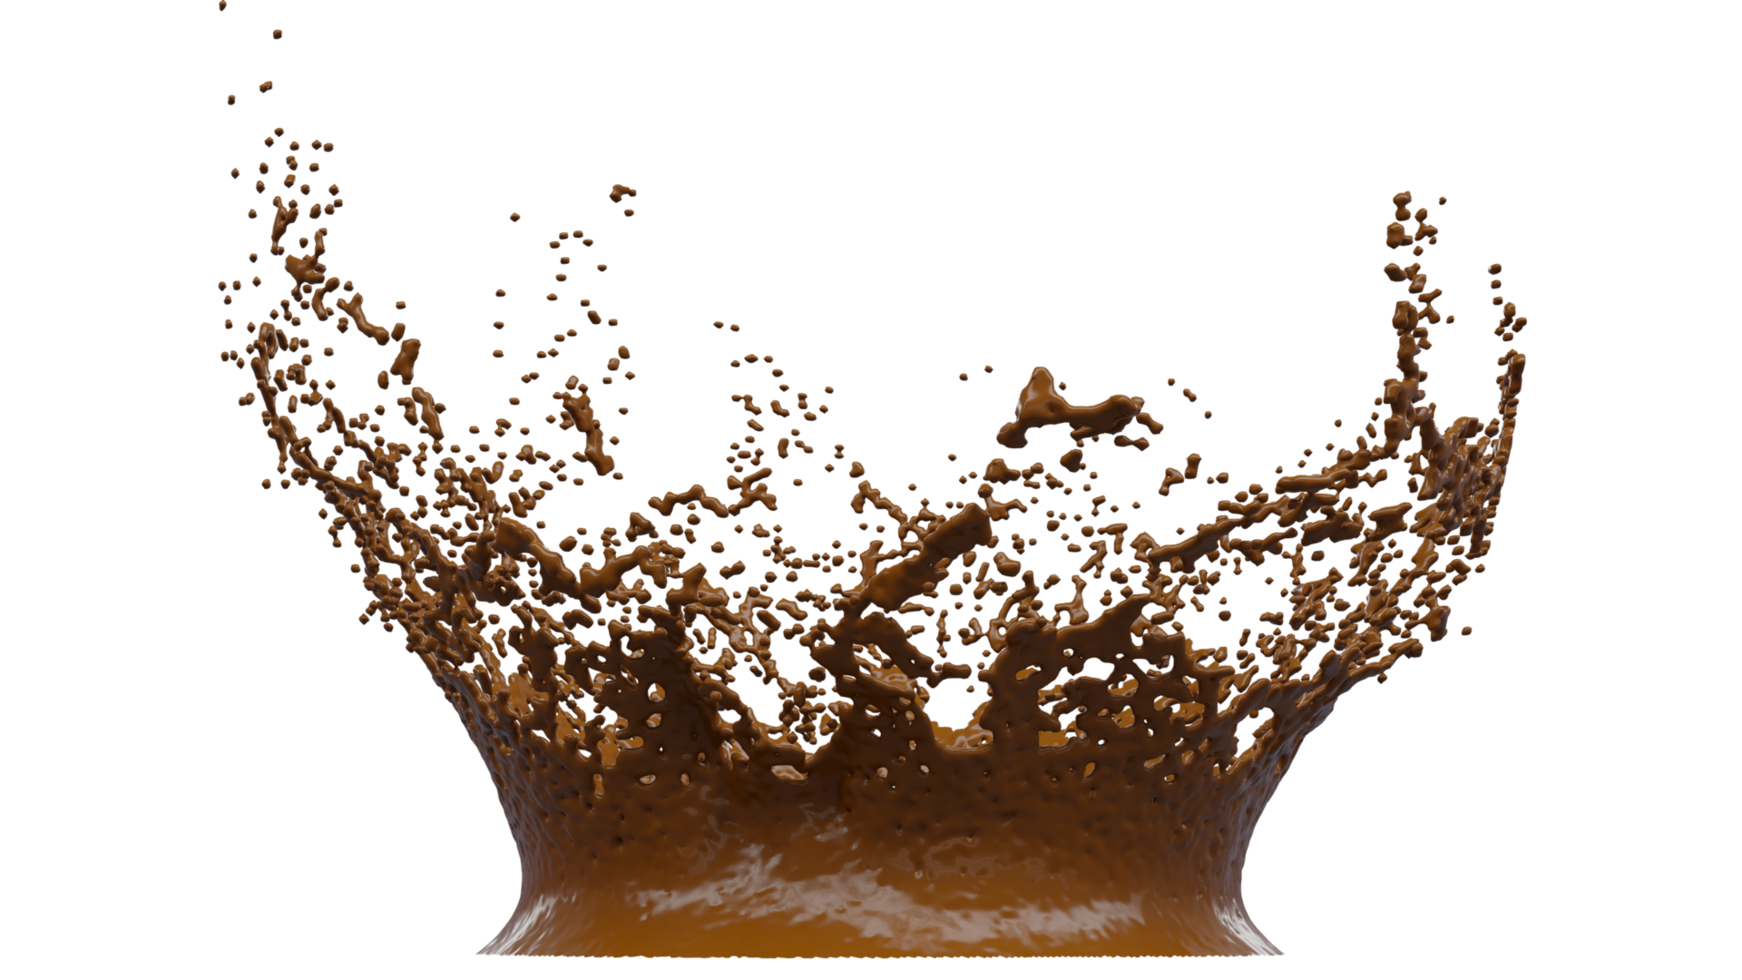 Chocolate Splash with Droplets png